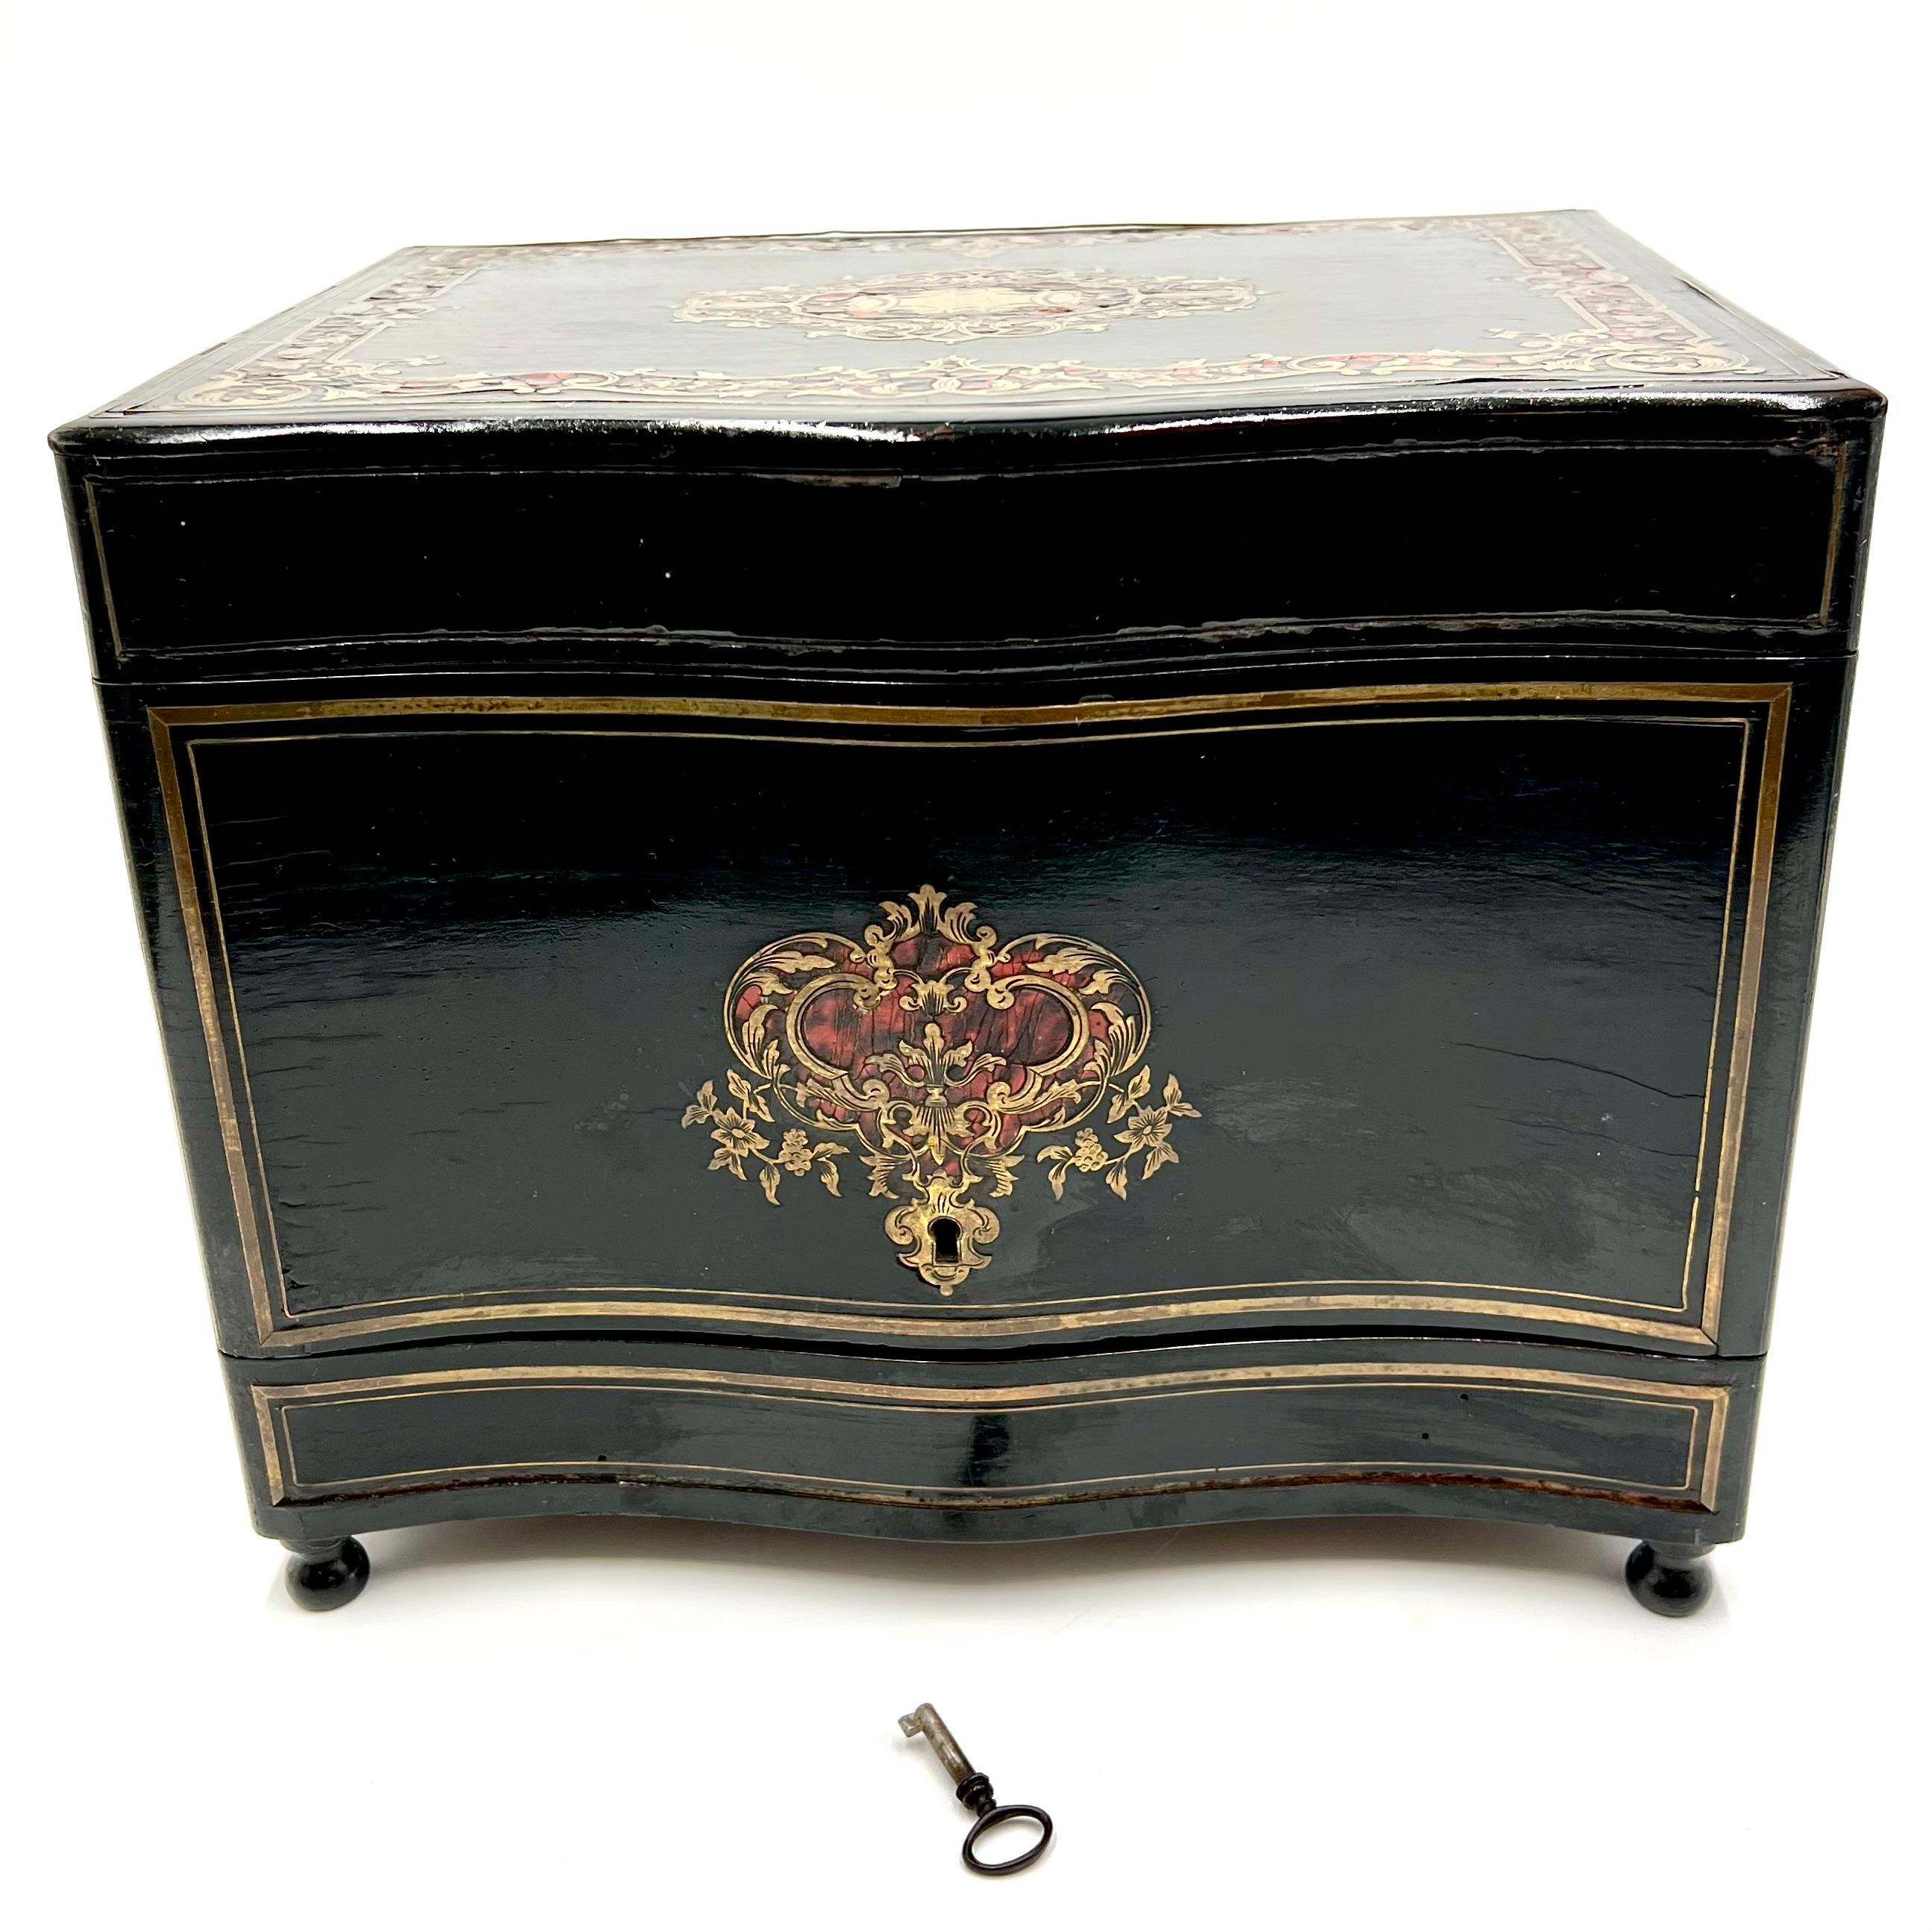 Presenting an exquisite antique French Tantalus liquor cabinet that transports you back to the elegance of the mid to late 1800s. This remarkable piece has been crafted in the sophisticated Napoleon III style, showcasing ebonized wood, intricate